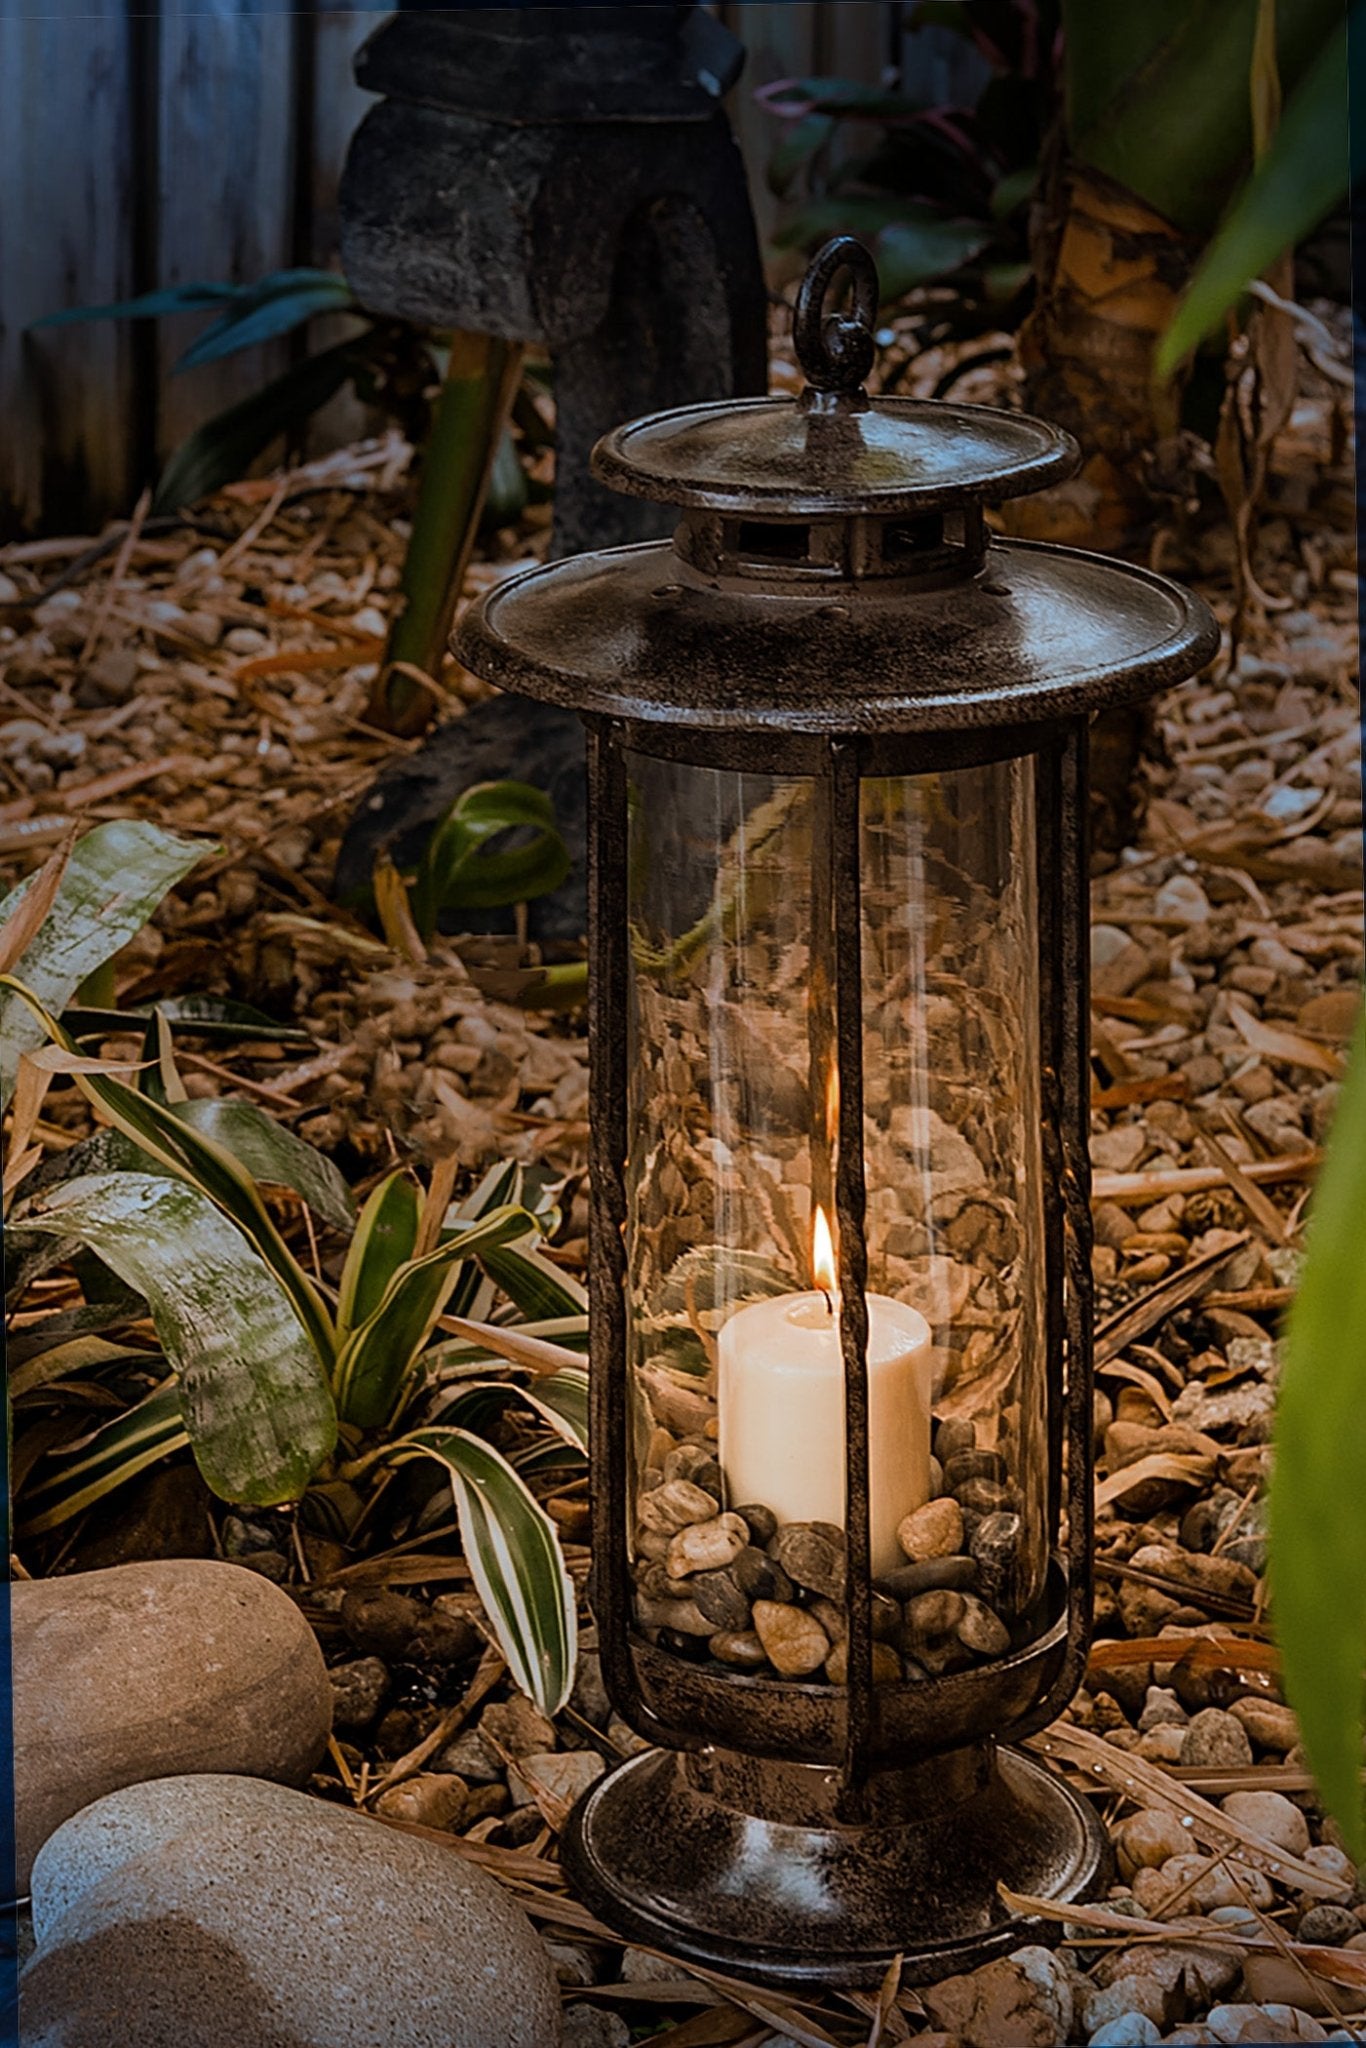 Home Reflections Set of (2) 10 Indoor/OutdoorMetal Lanterns ,Brass